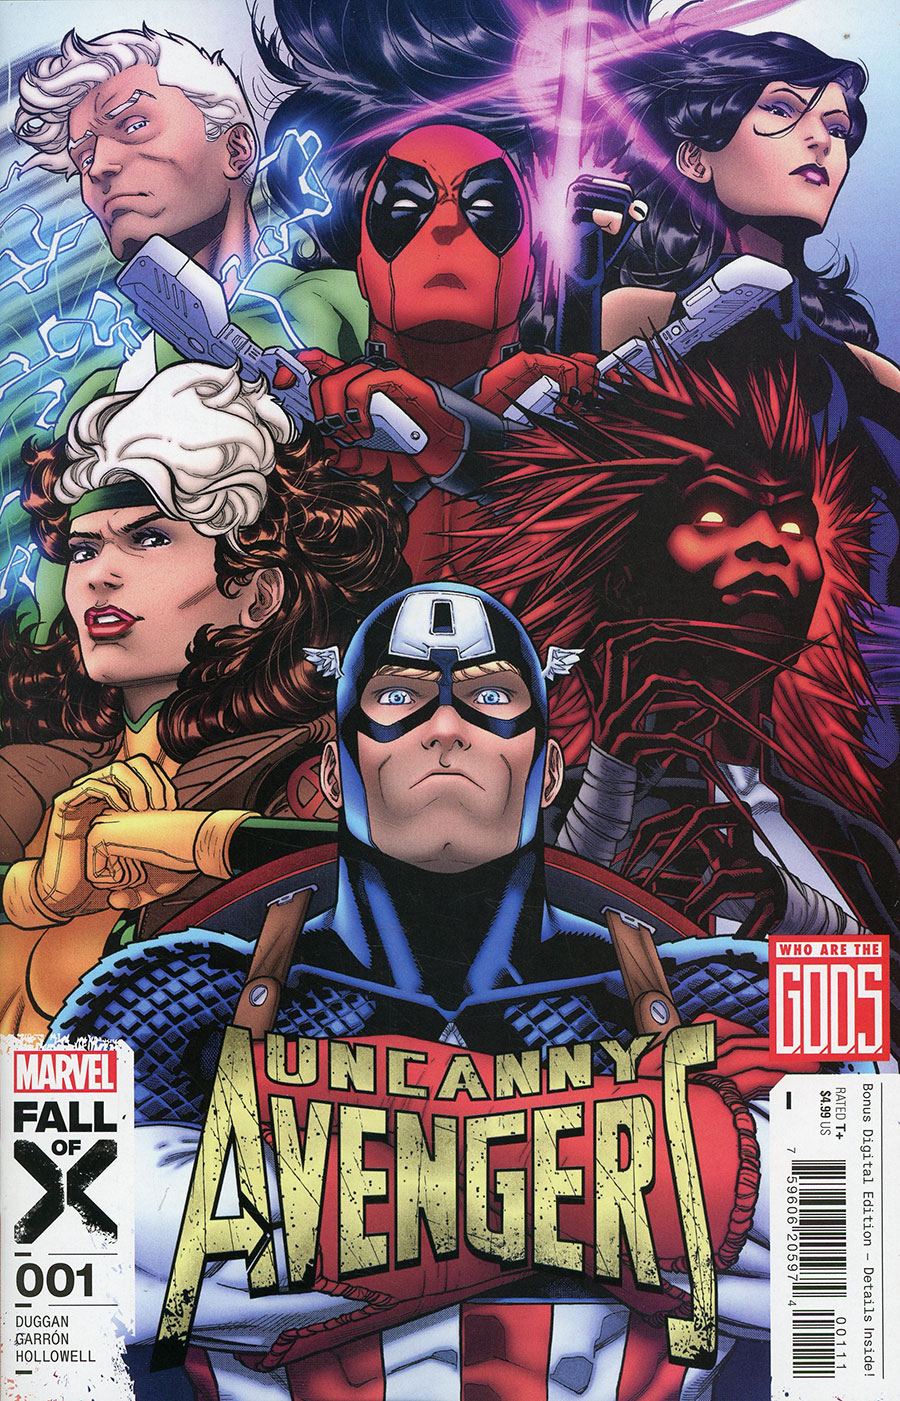 Uncanny Avengers Vol 4 #1 Cover A Regular Javier Garron Cover (Fall Of X Tie-In)(G.O.D.S. Tie-In)